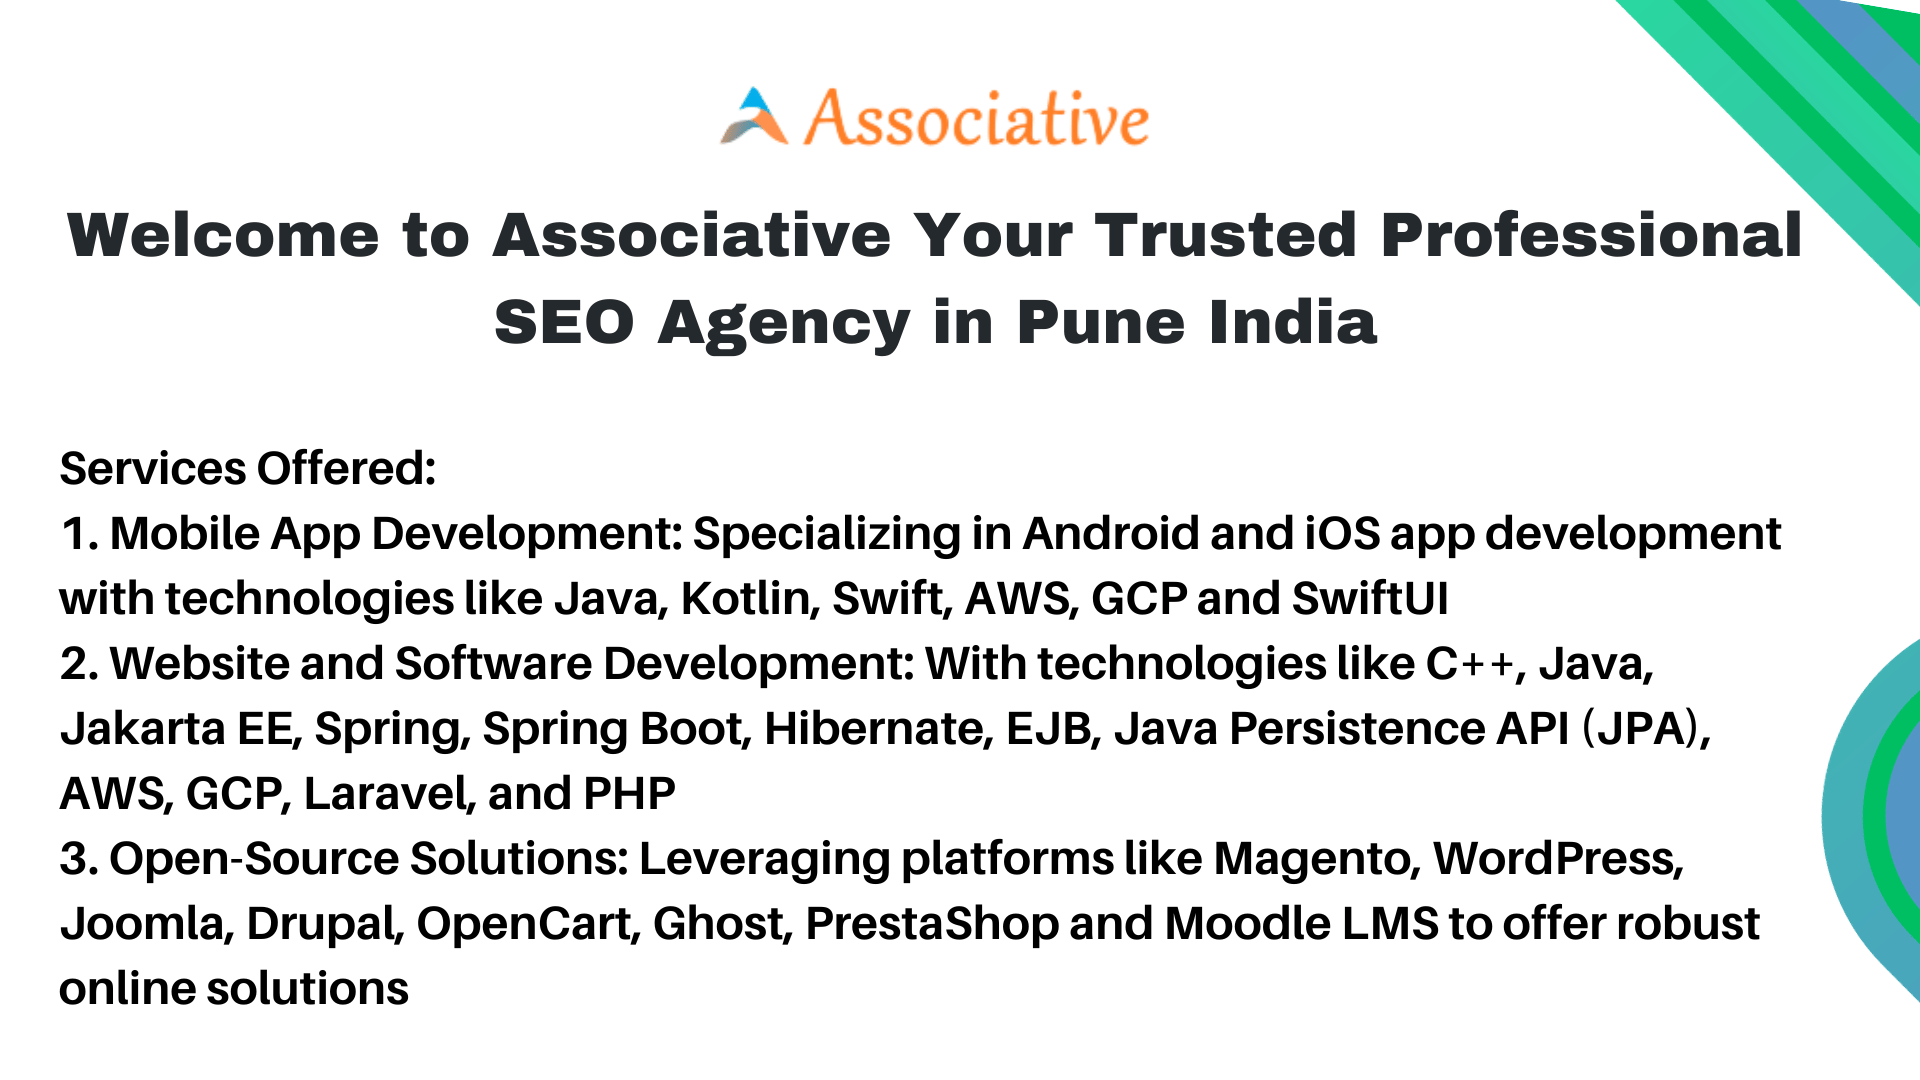 Welcome to Associative Your Trusted Professional SEO Agency in Pune India